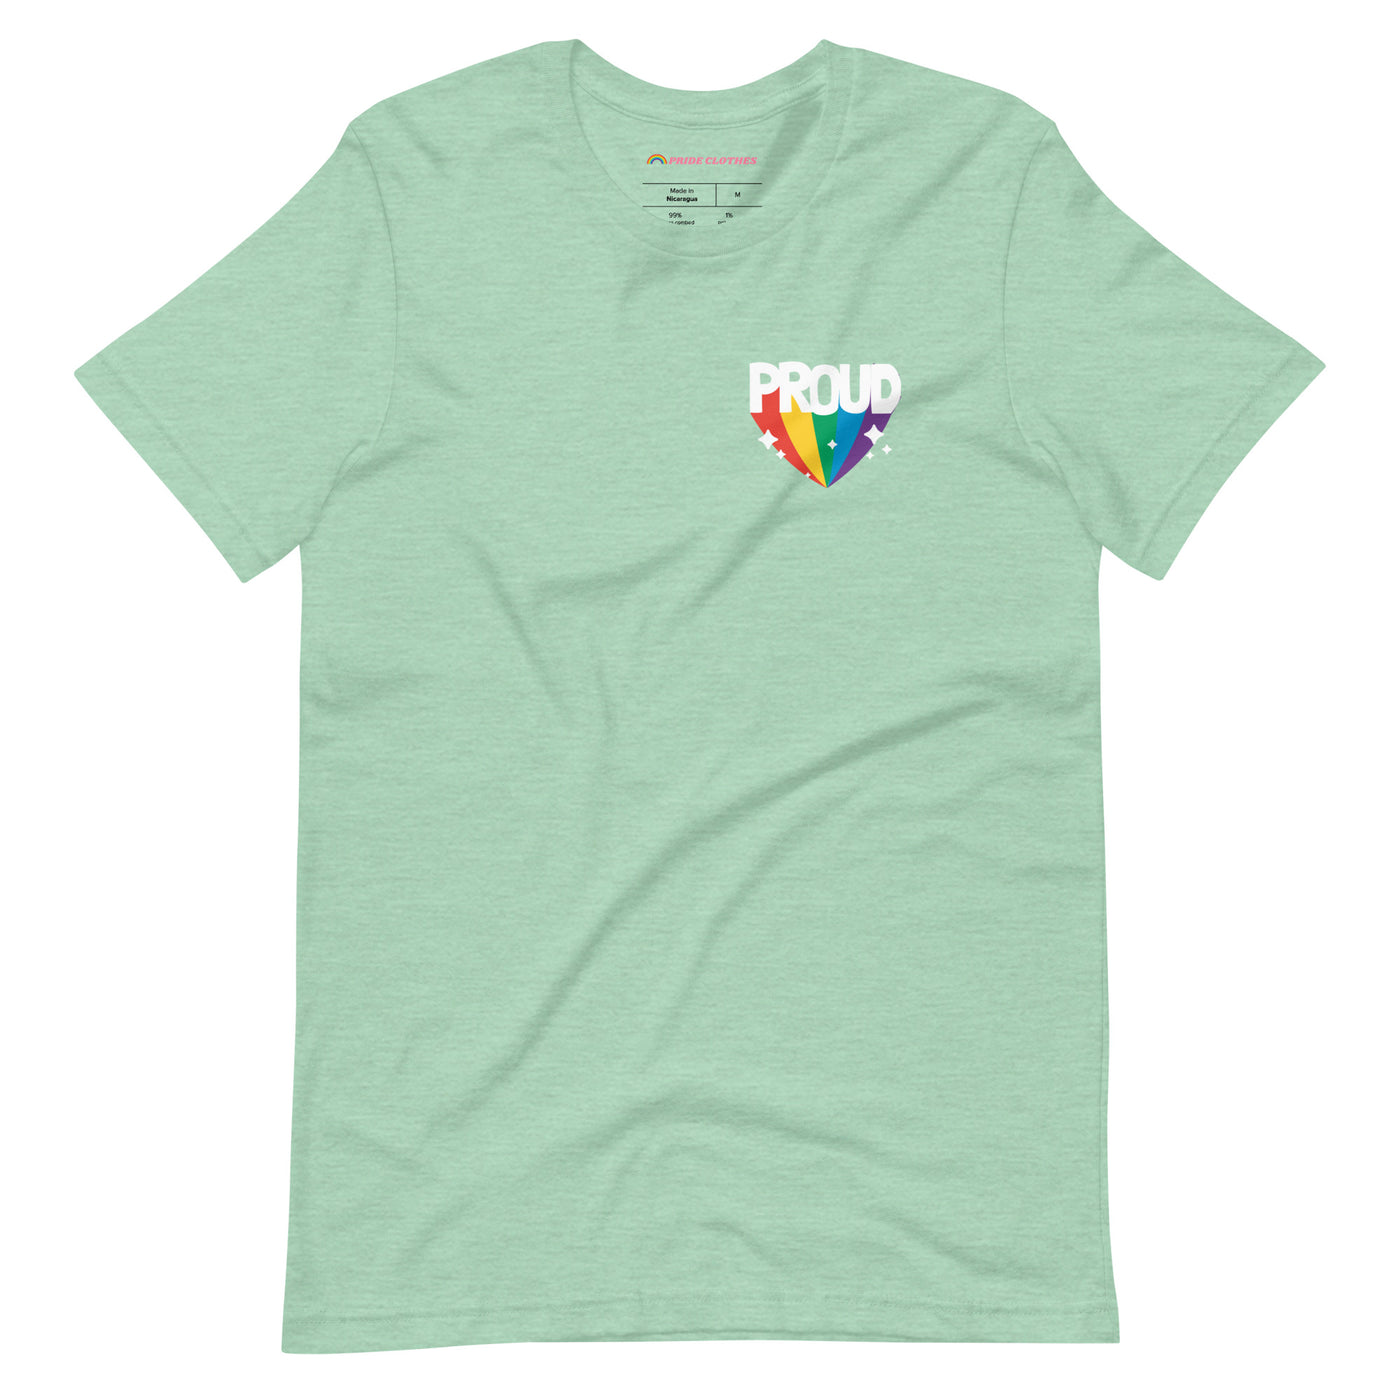 Pride Clothes - Proud of My True Rainbow Colors Gay Pride T-Shirt - Heather Prism Mint